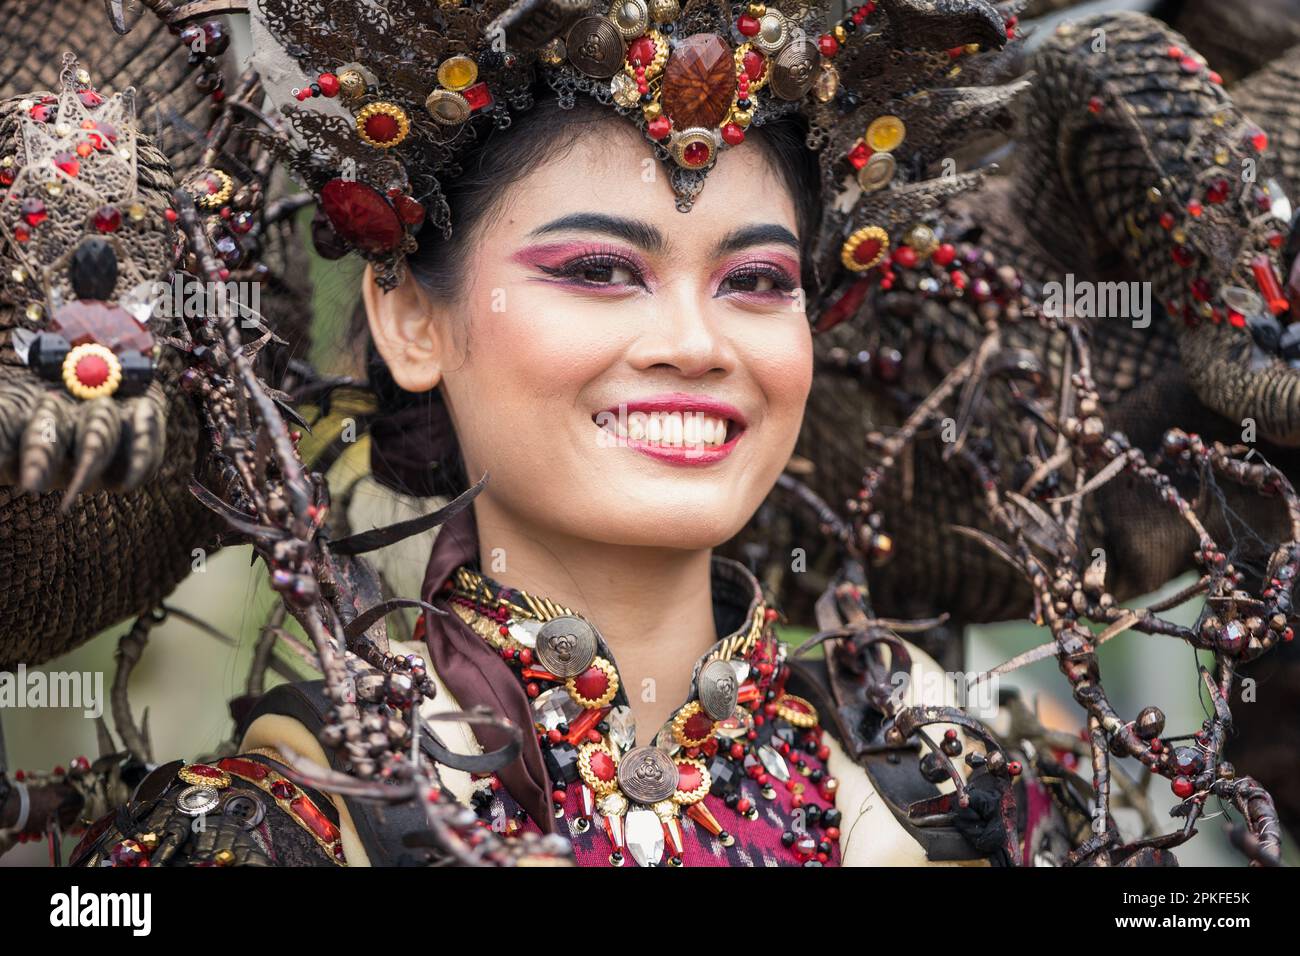 Indonesian woman wearing a costume from Jember Fashion Carnaval smiling at the camera Stock Photo